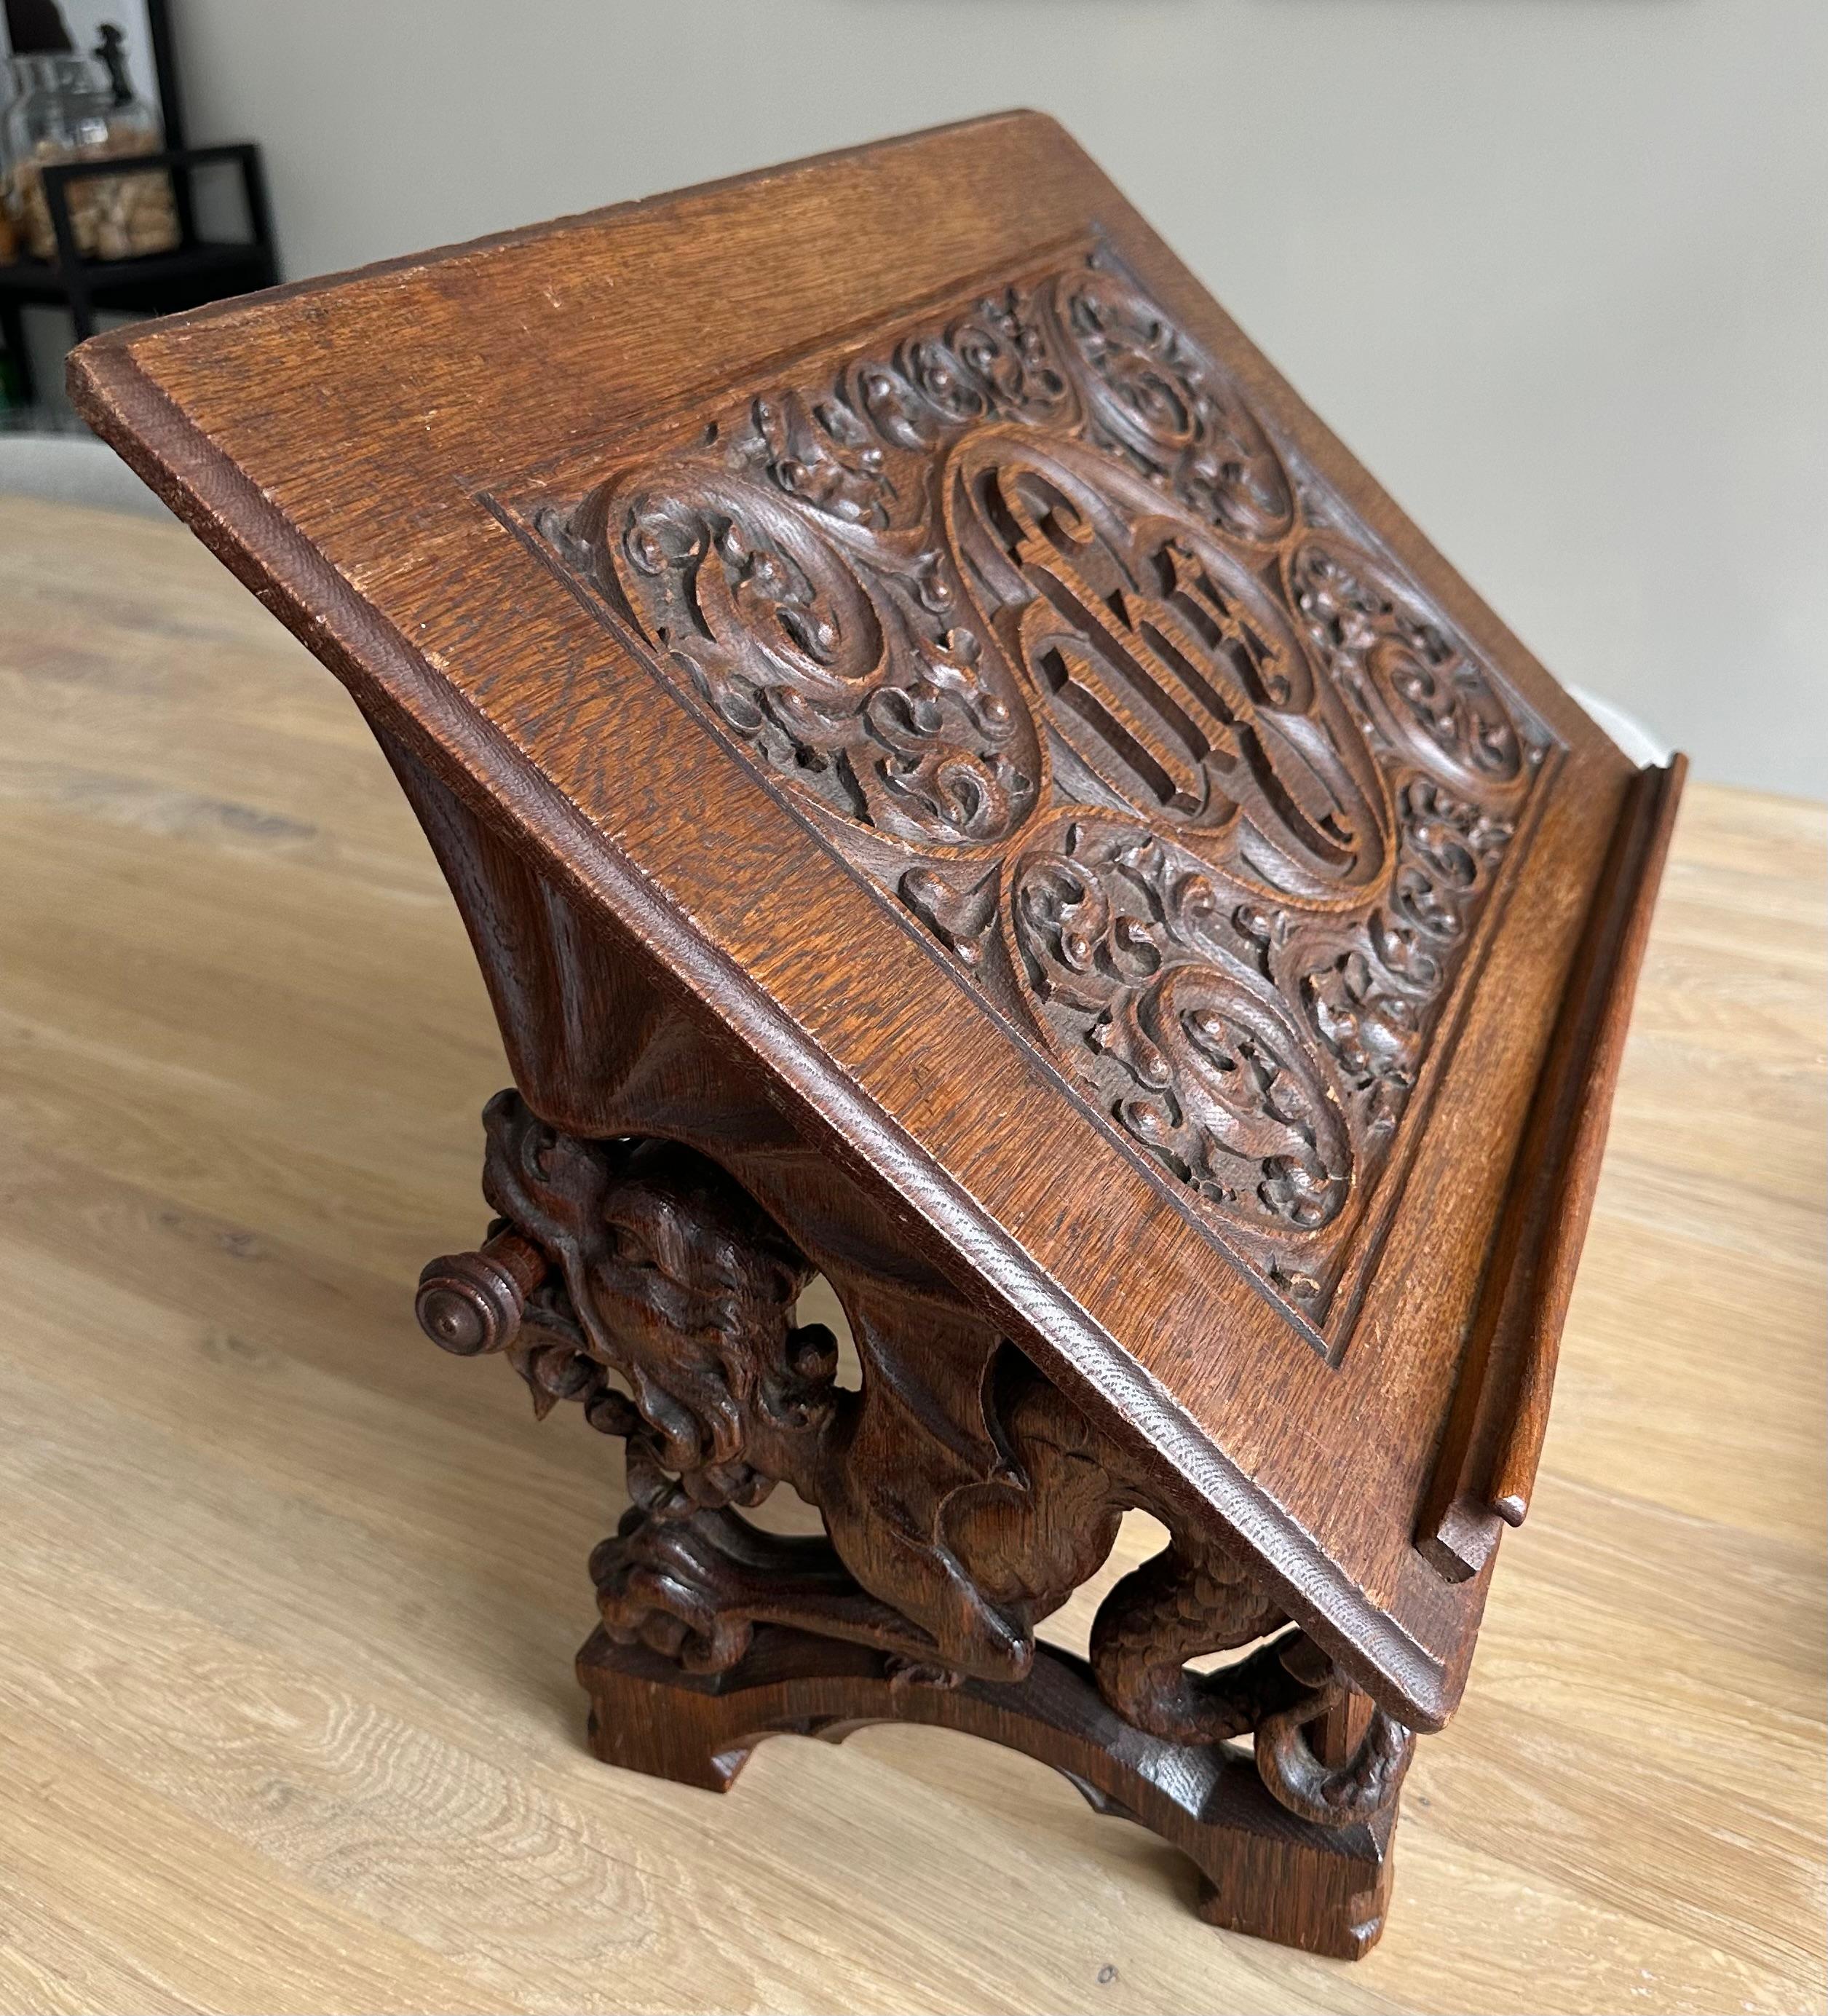 Unique, wonderfully sculptural and meaningful Gothic church bible stand.

This relatively large, hand carved antique Gothic Revival bible stand is another one of our recent rare finds. All handcrafted out of solid oak only, this church stand